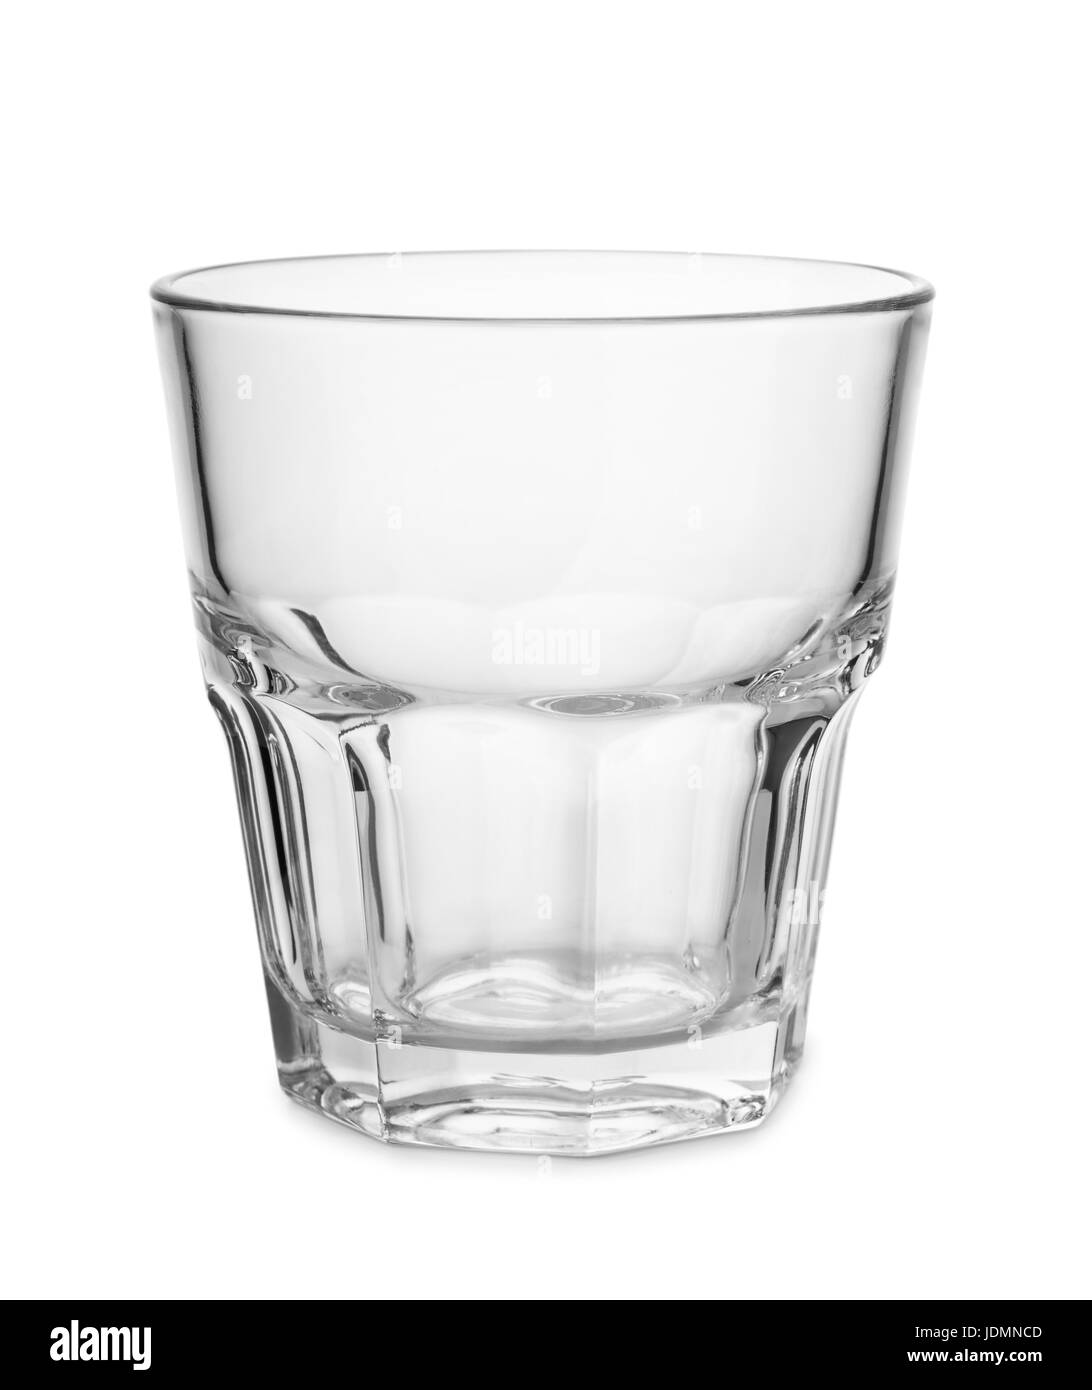 A l'ancienne vide verre whisky isolated on white Banque D'Images